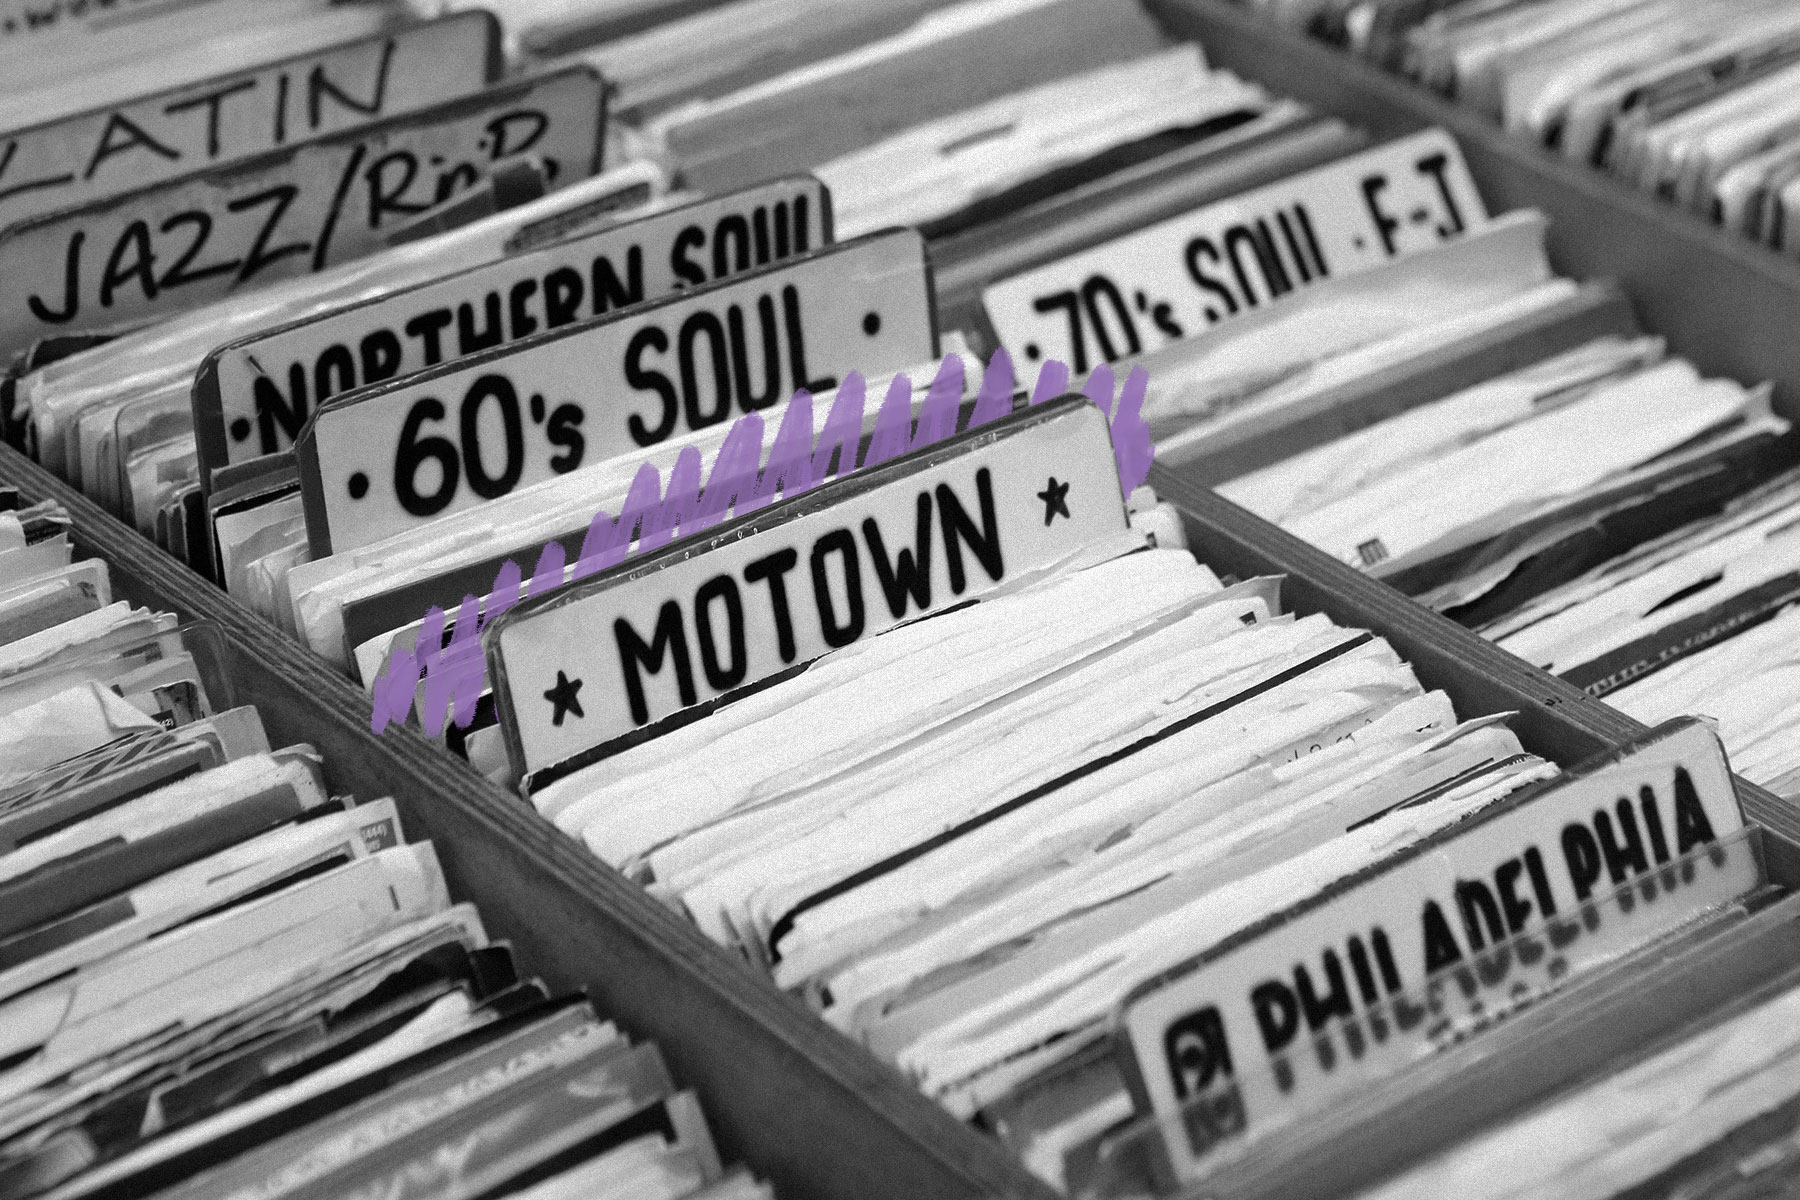 Motown records section